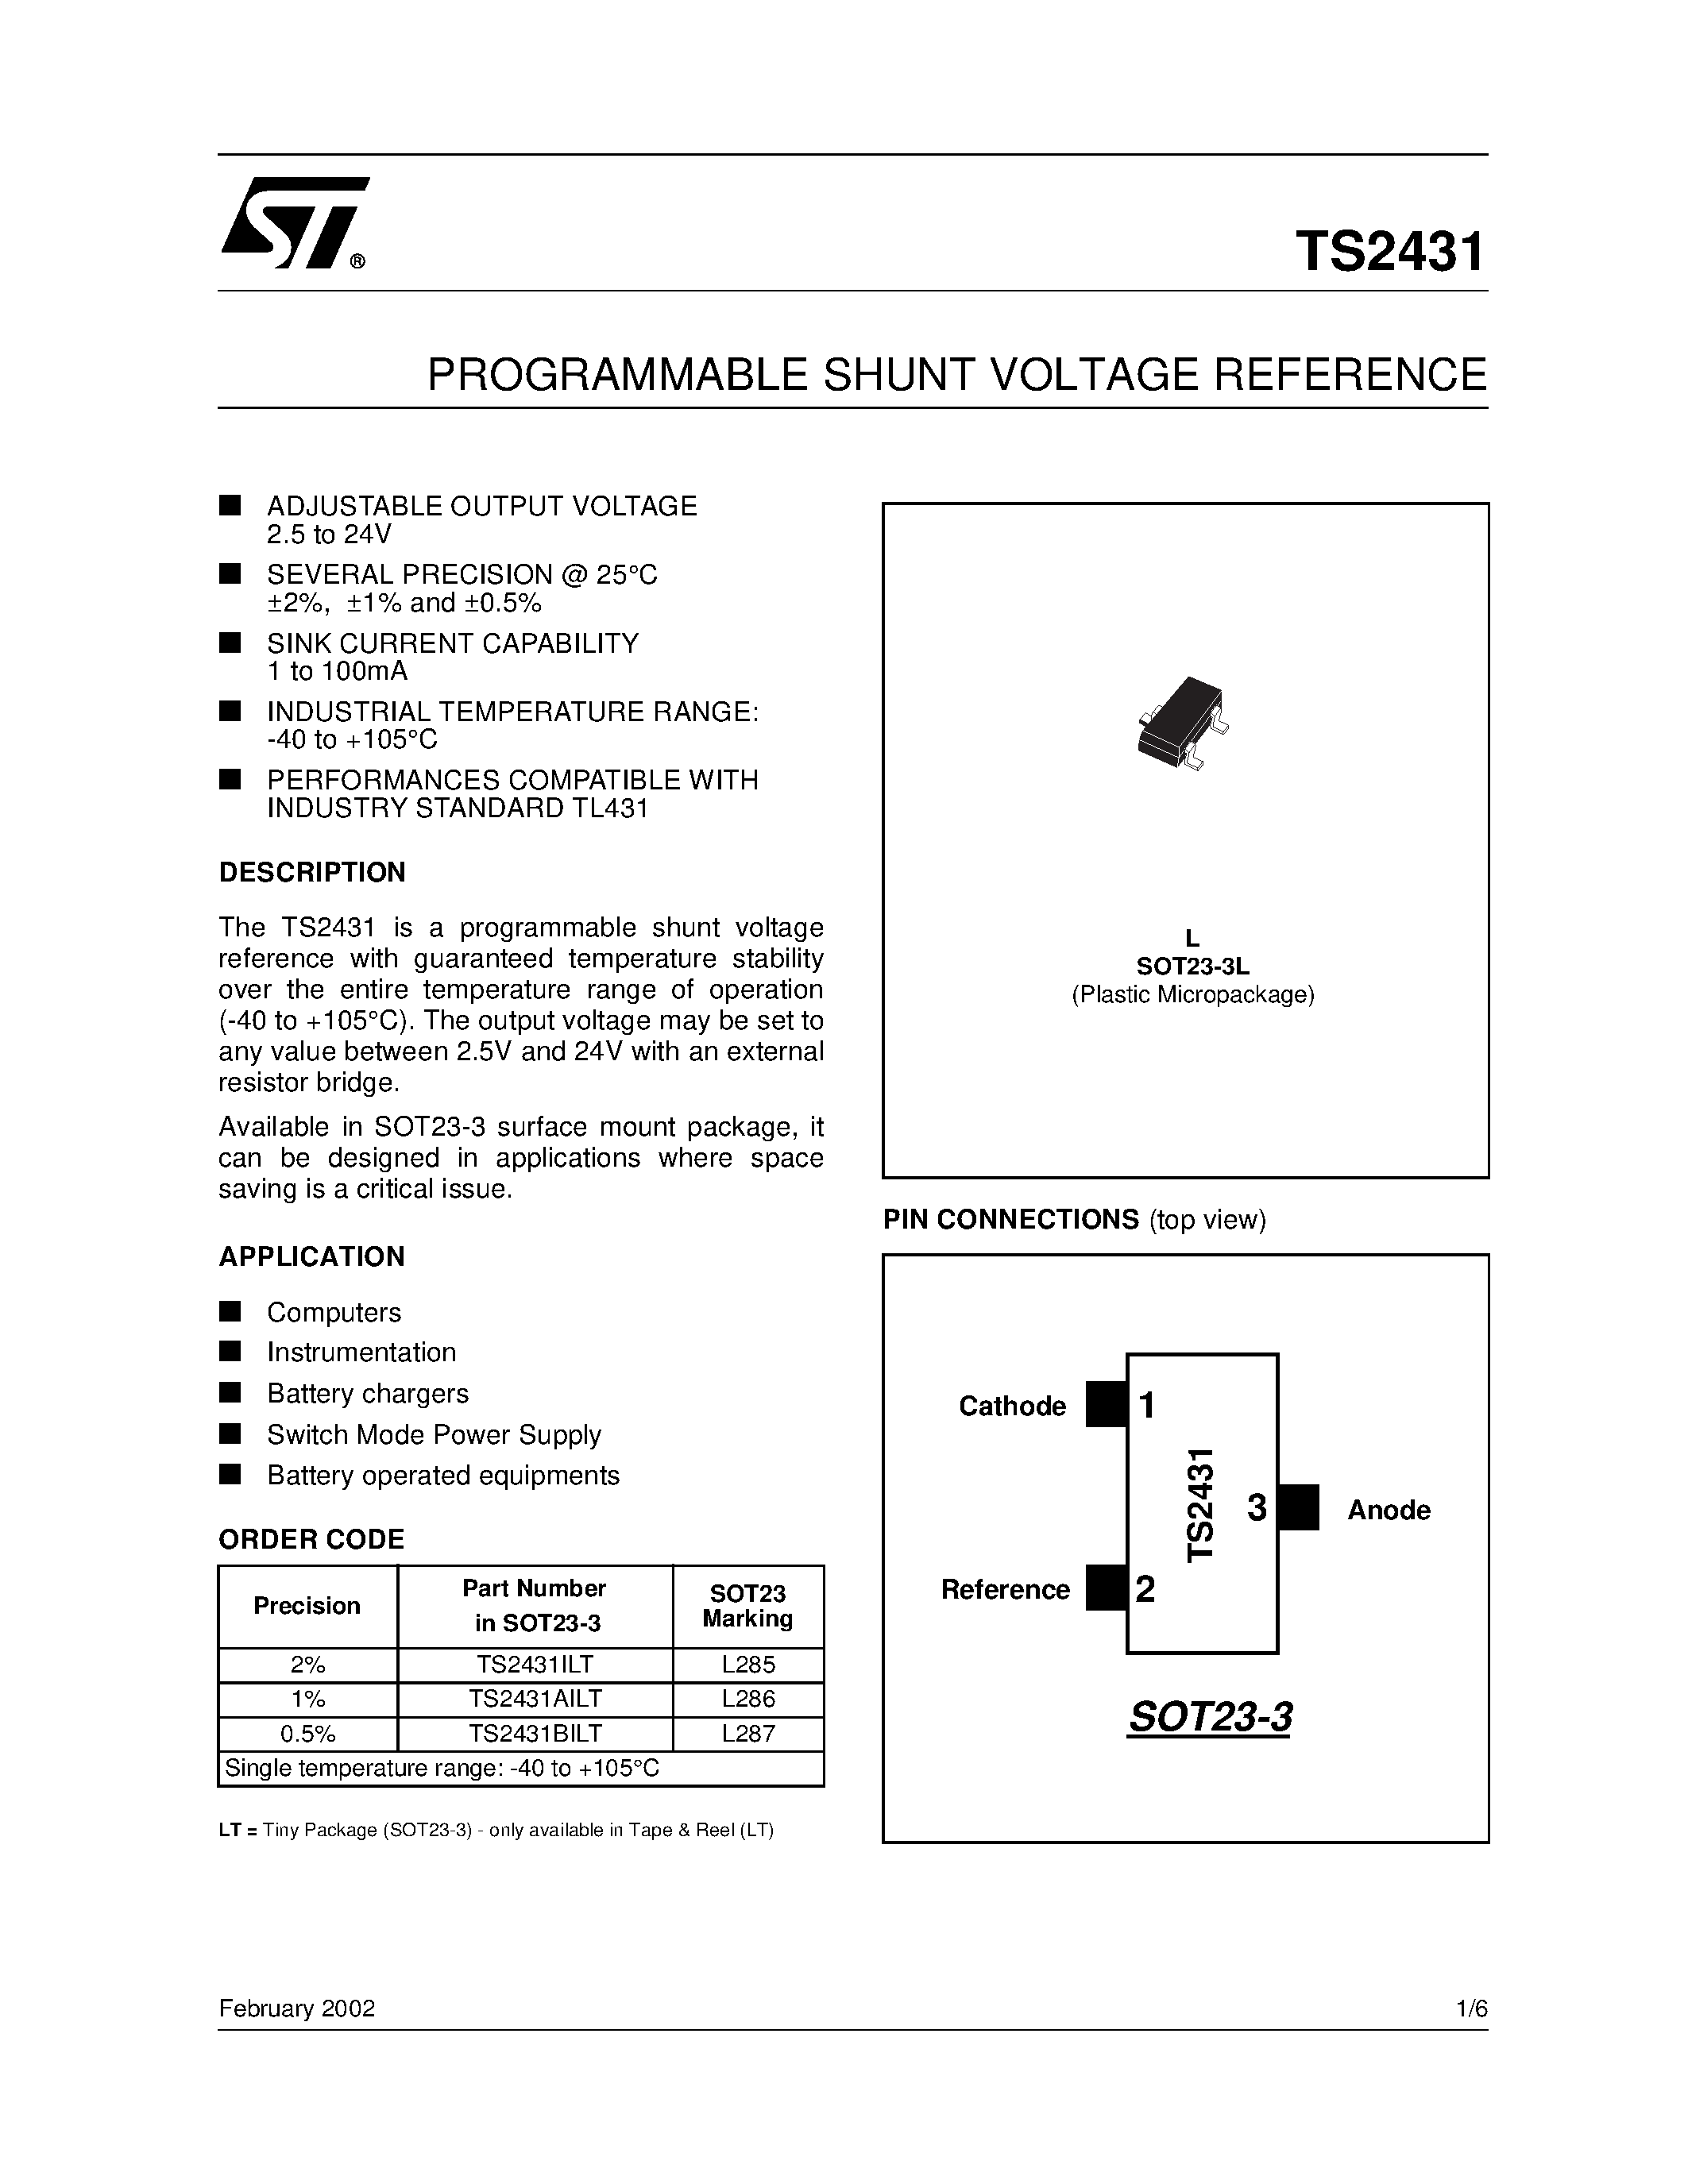 Даташит TS2431 - PROGRAMMABLE SHUNT VOLTAGE REFERENCE страница 1